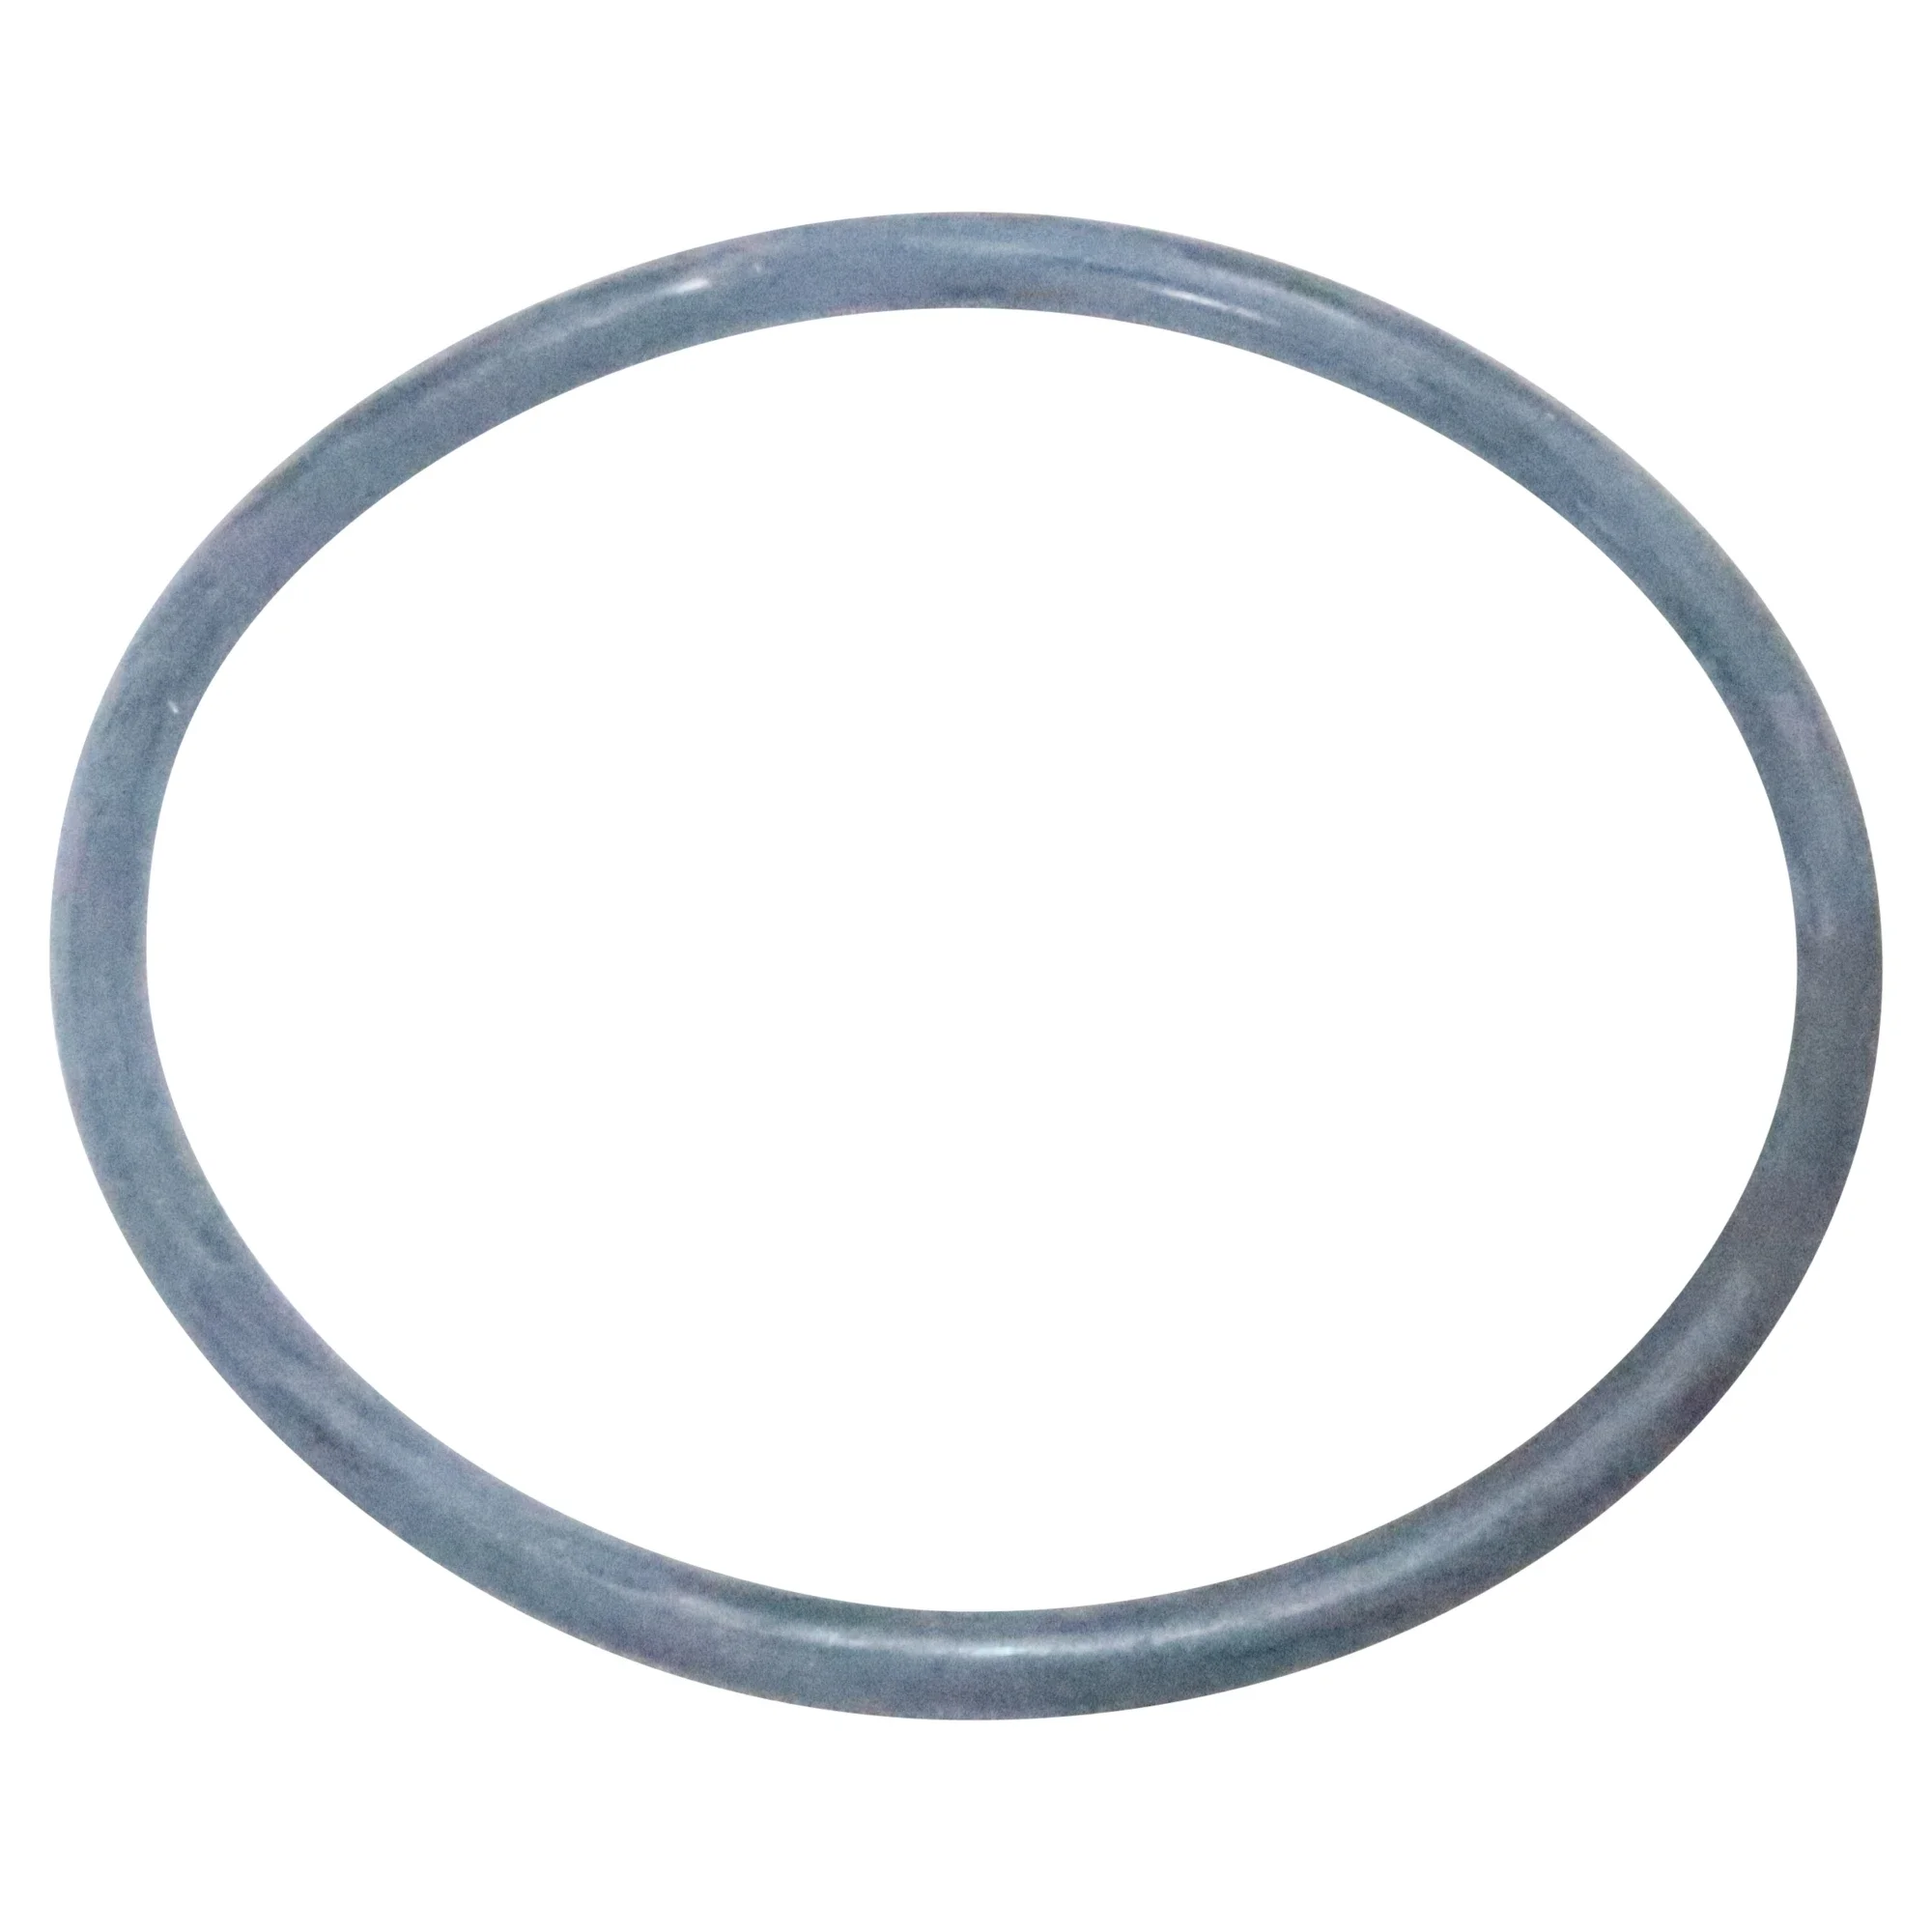 Wastebuilt® Replacement for McNeilus O-Ring,32 Split Flange